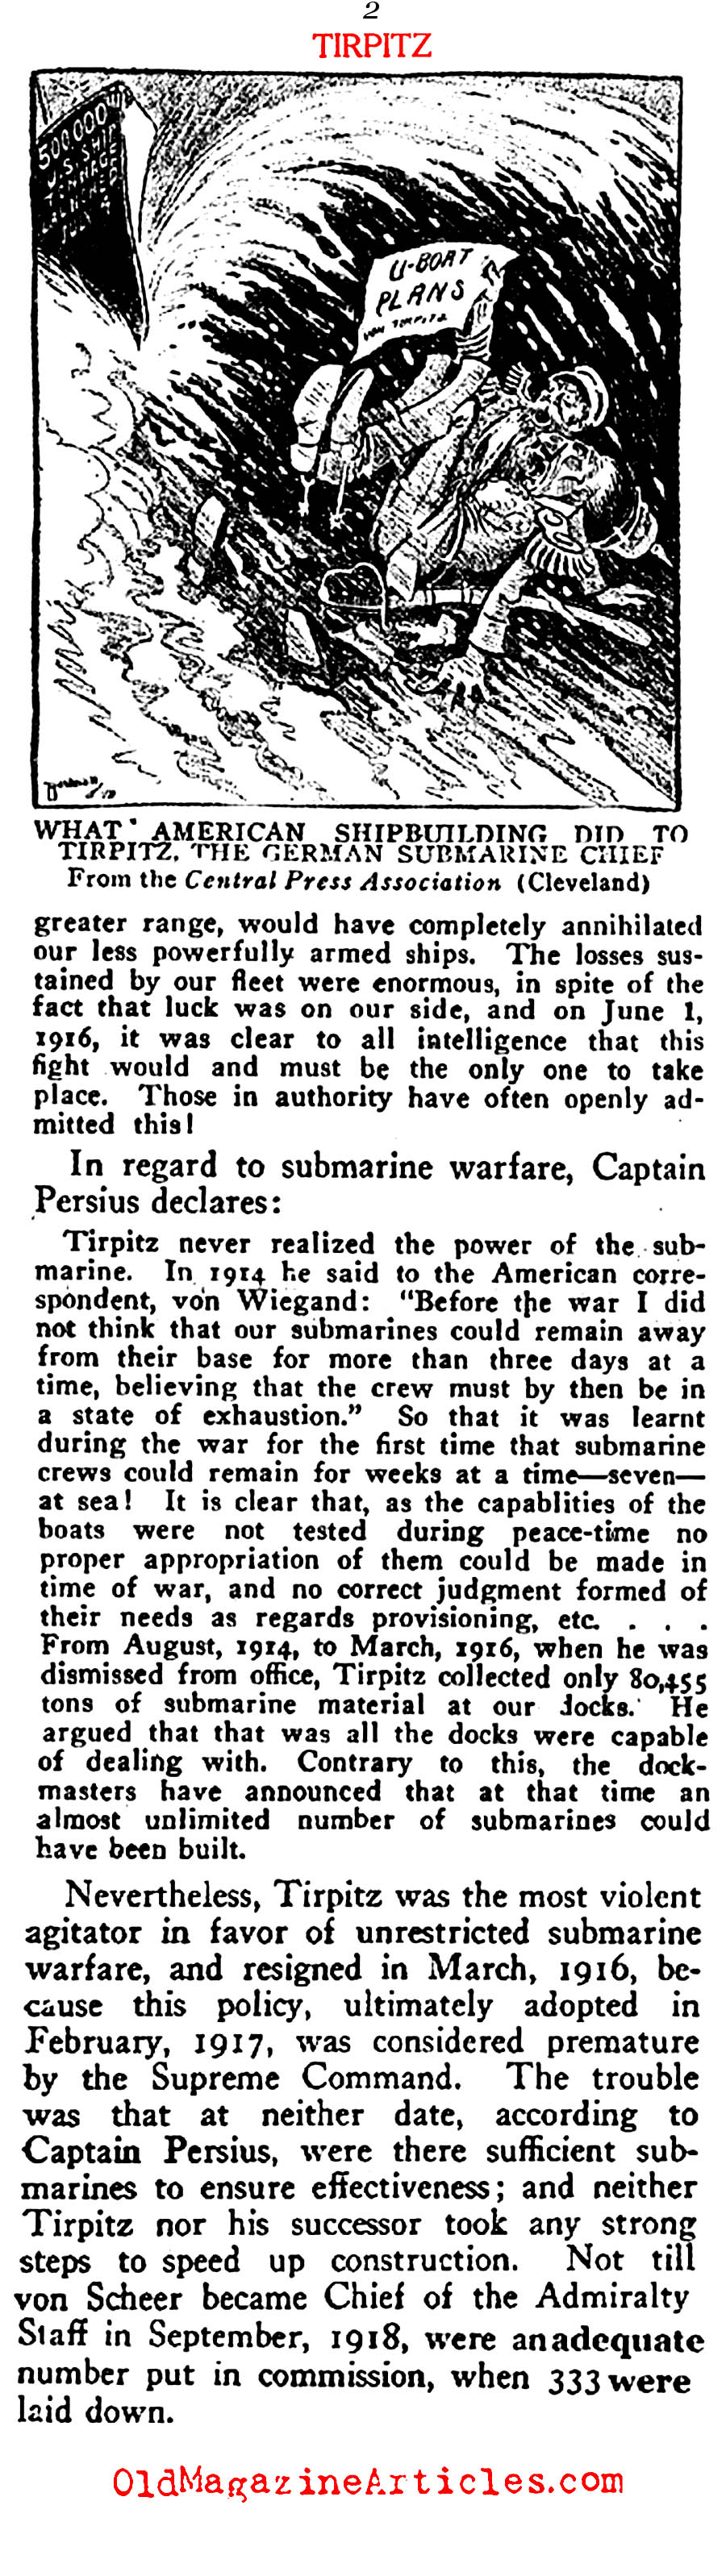 German Admiral Von Tirpitz Condemned (Review of Reviews, 1919)